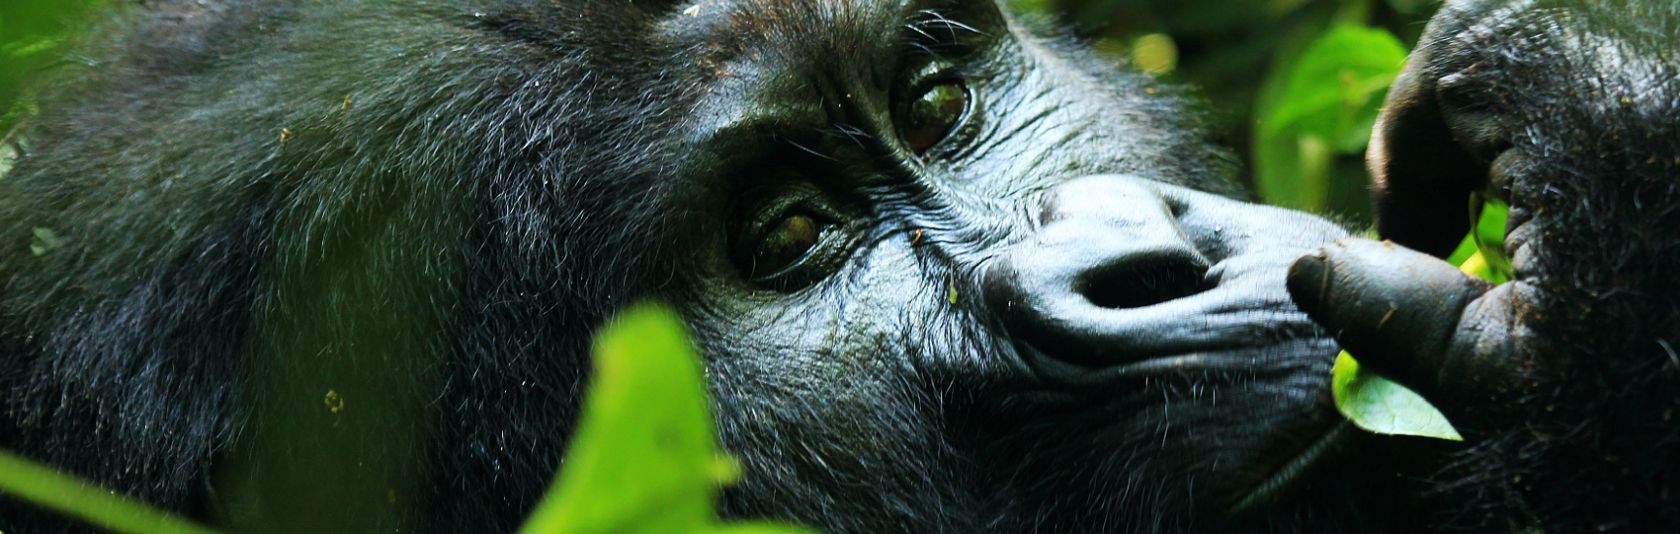 Gorillas Plains 14 Day Kenya Tour And Travel Package